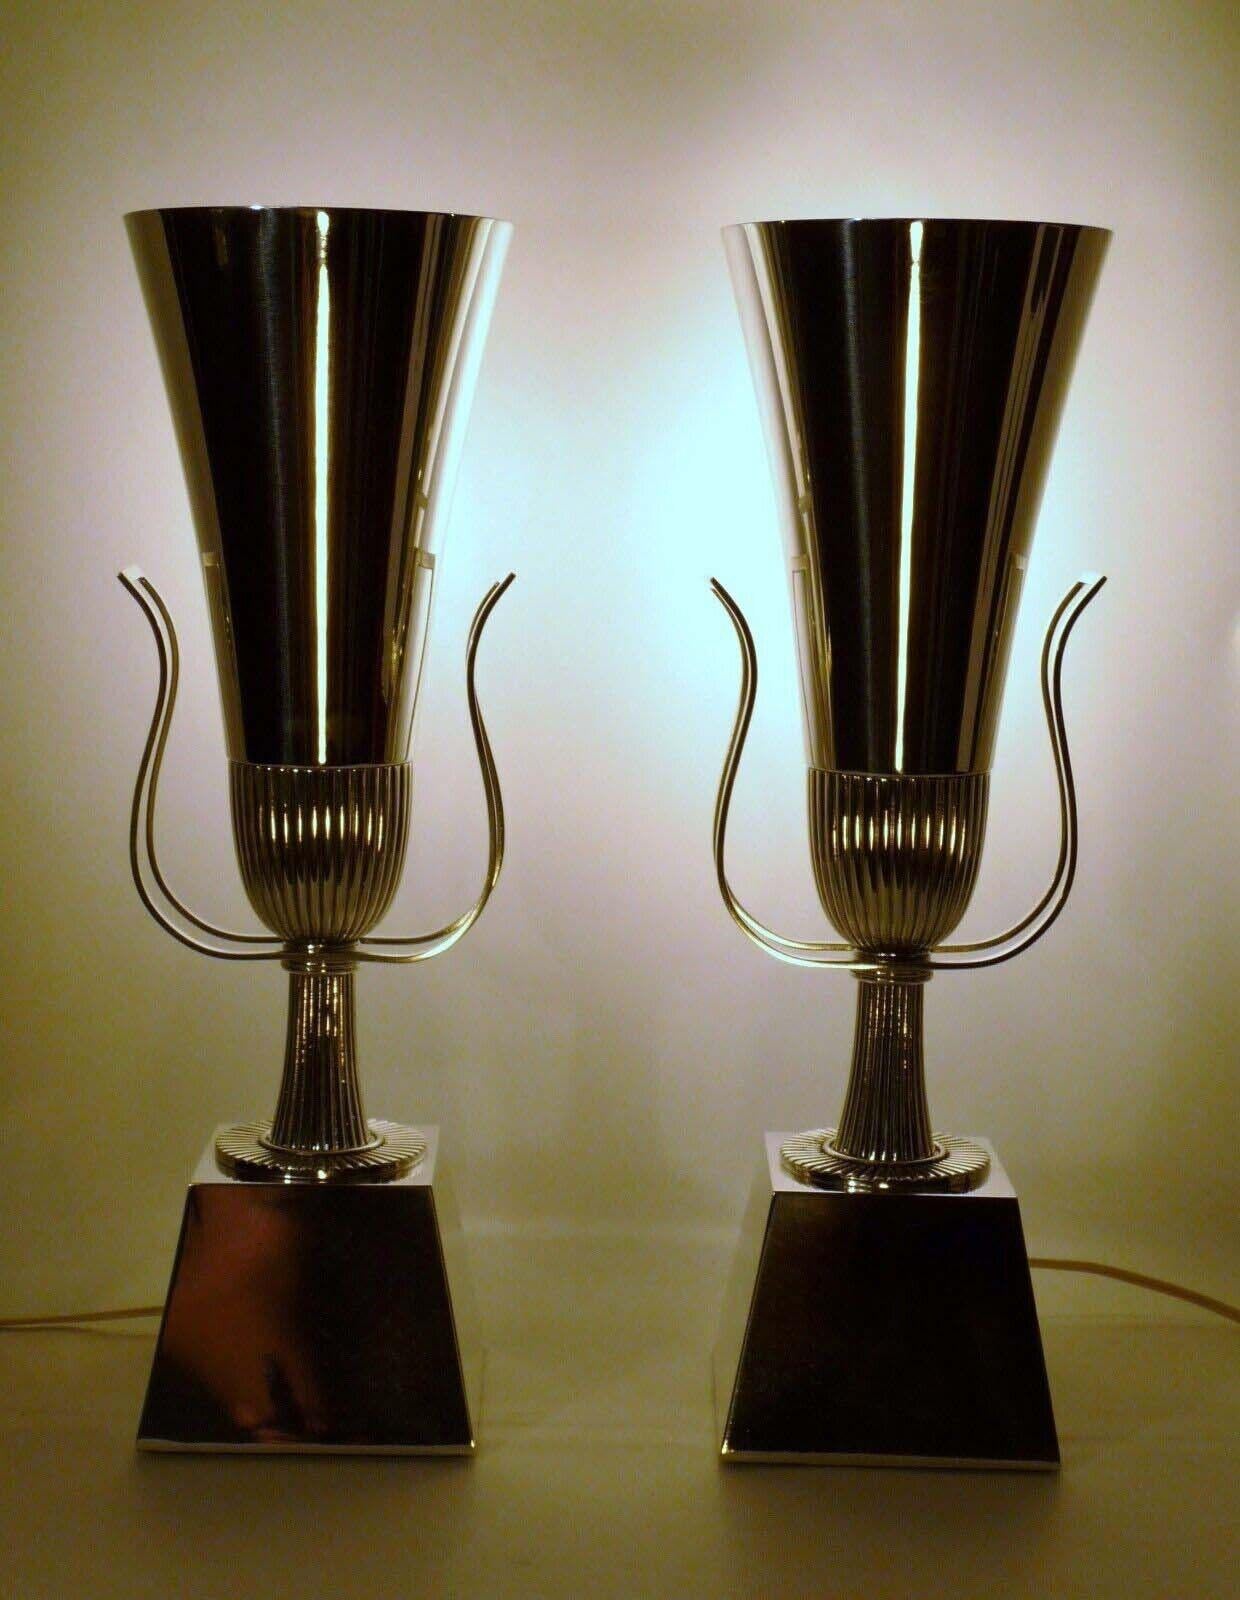 Midcentury Pair of Tommi Parzinger Lightolier Silver Plated Torchiere Lamps In Good Condition For Sale In Keego Harbor, MI